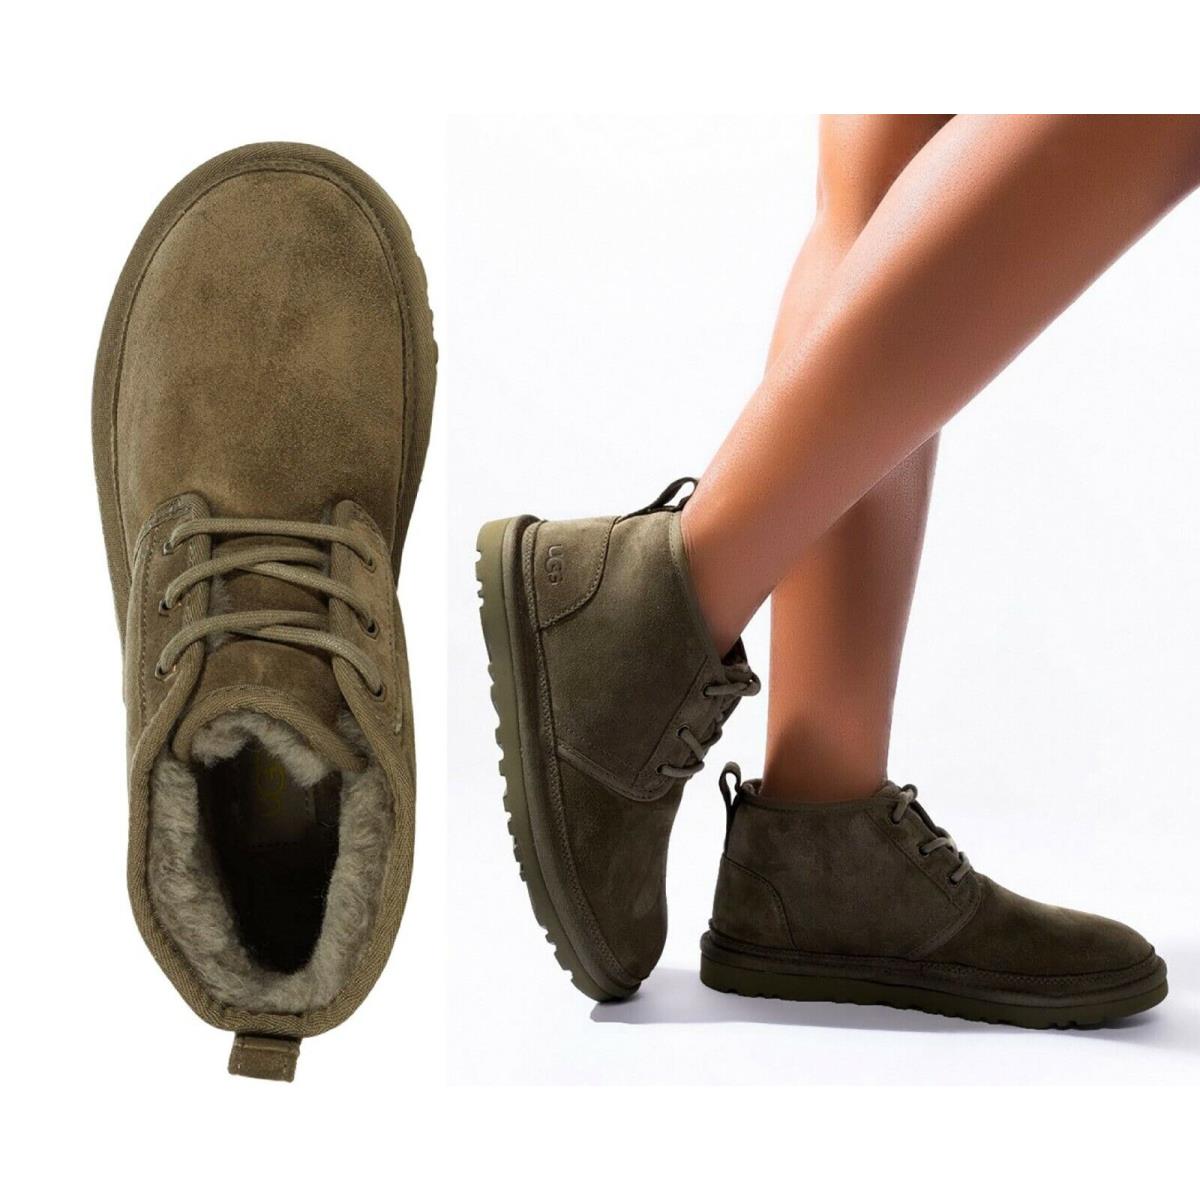 Ugg Brand Women`s Neumel B Olive Chukka Soft Ankle Boots Shoes - Olive